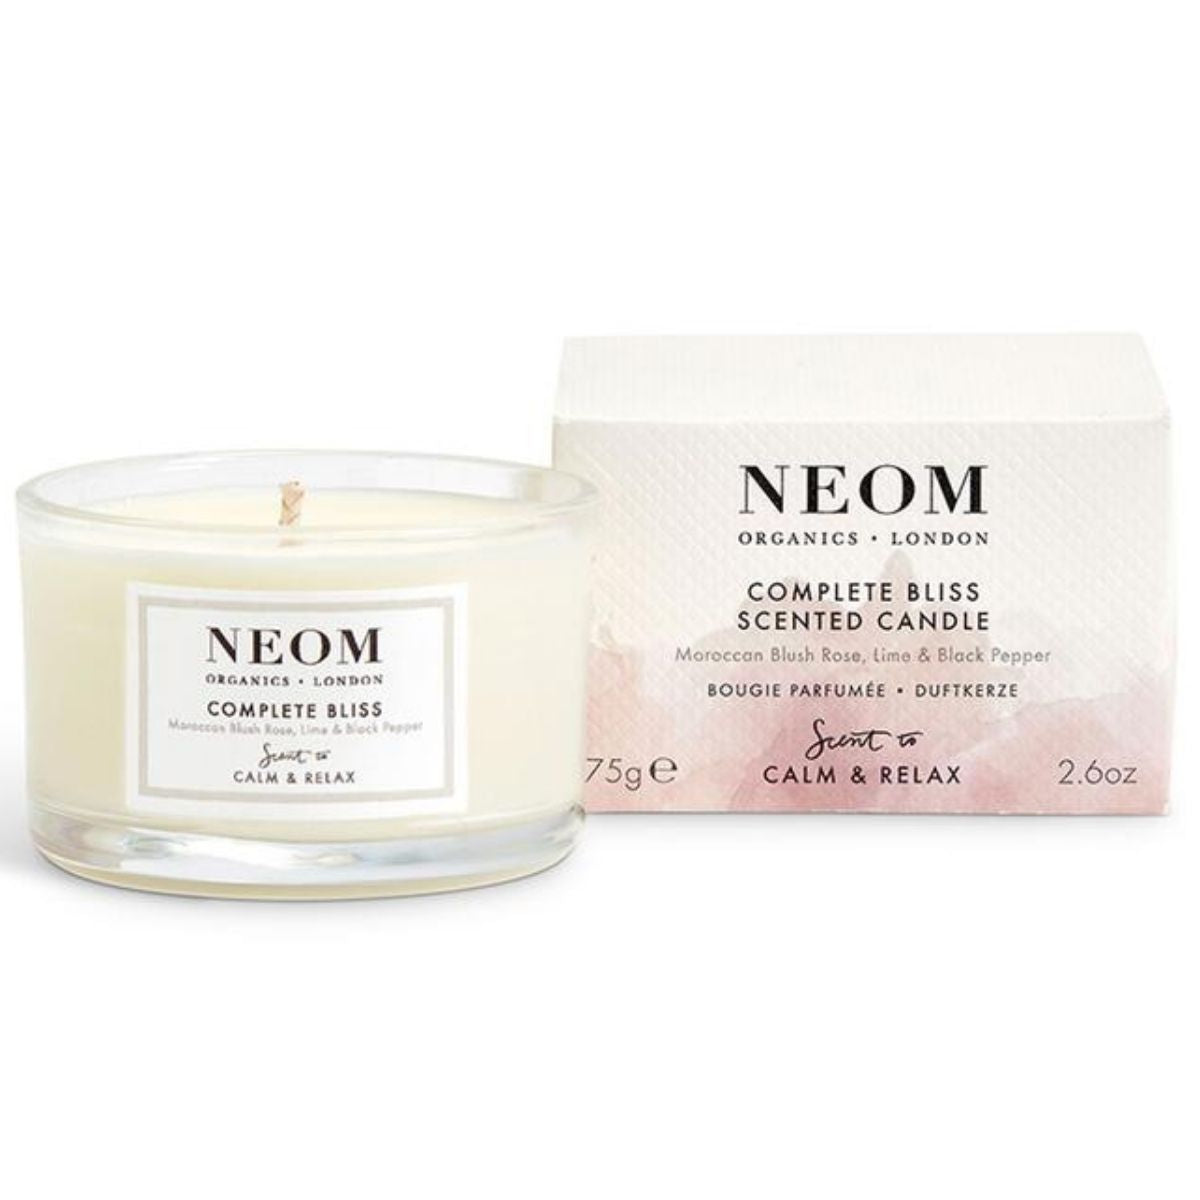 Neom Scent to Calm & Relax Complete Bliss Scented Candle Travel Size